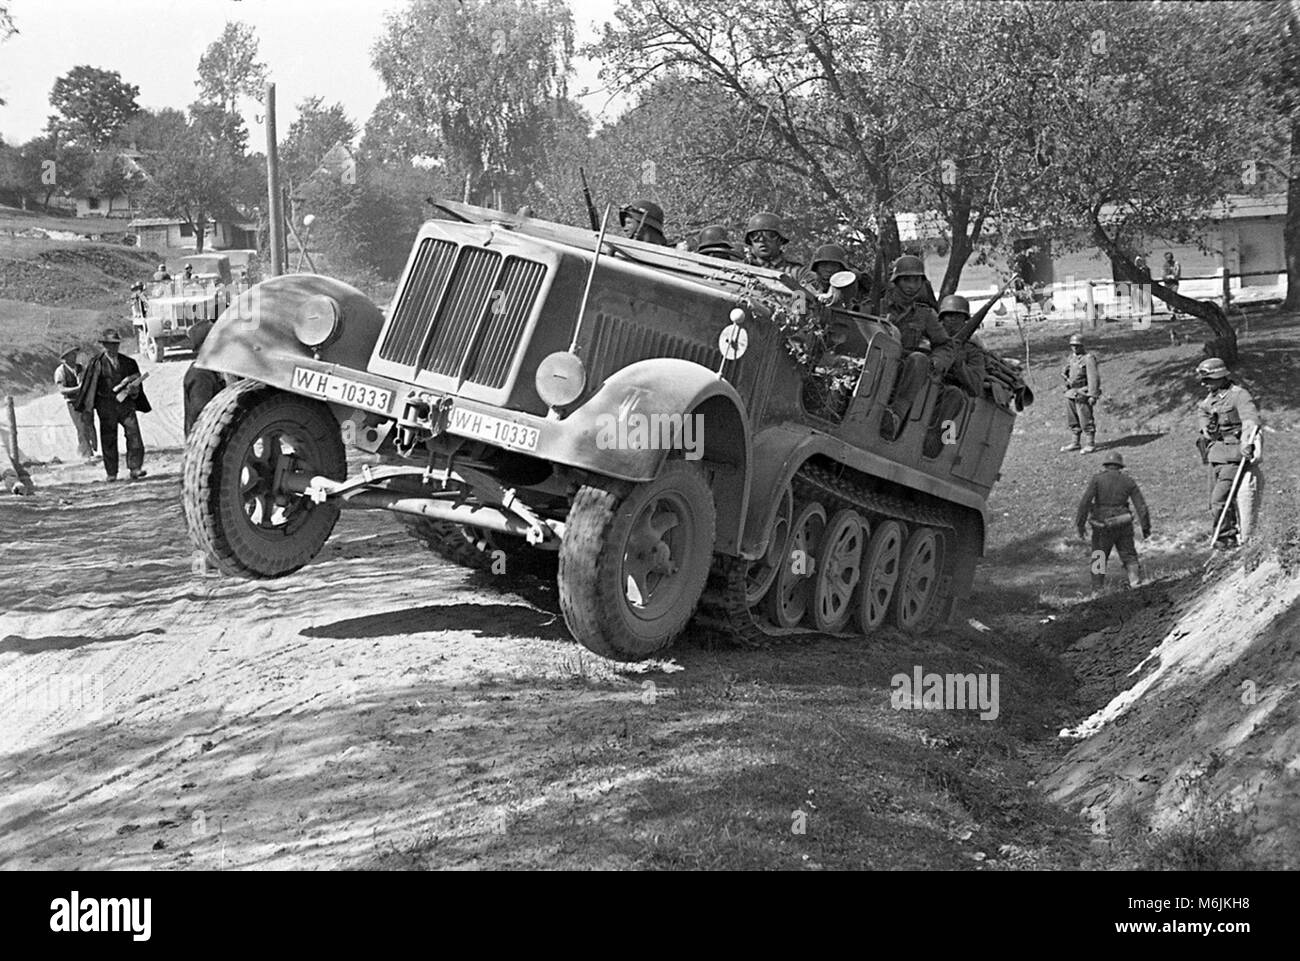 German Wehrmacht troops in SdKfz 6 half-track military vehicle near Sambor Poland in 1939 during the Invasion of Poland. The area is now called Sambir in the Ukraine. Stock Photo